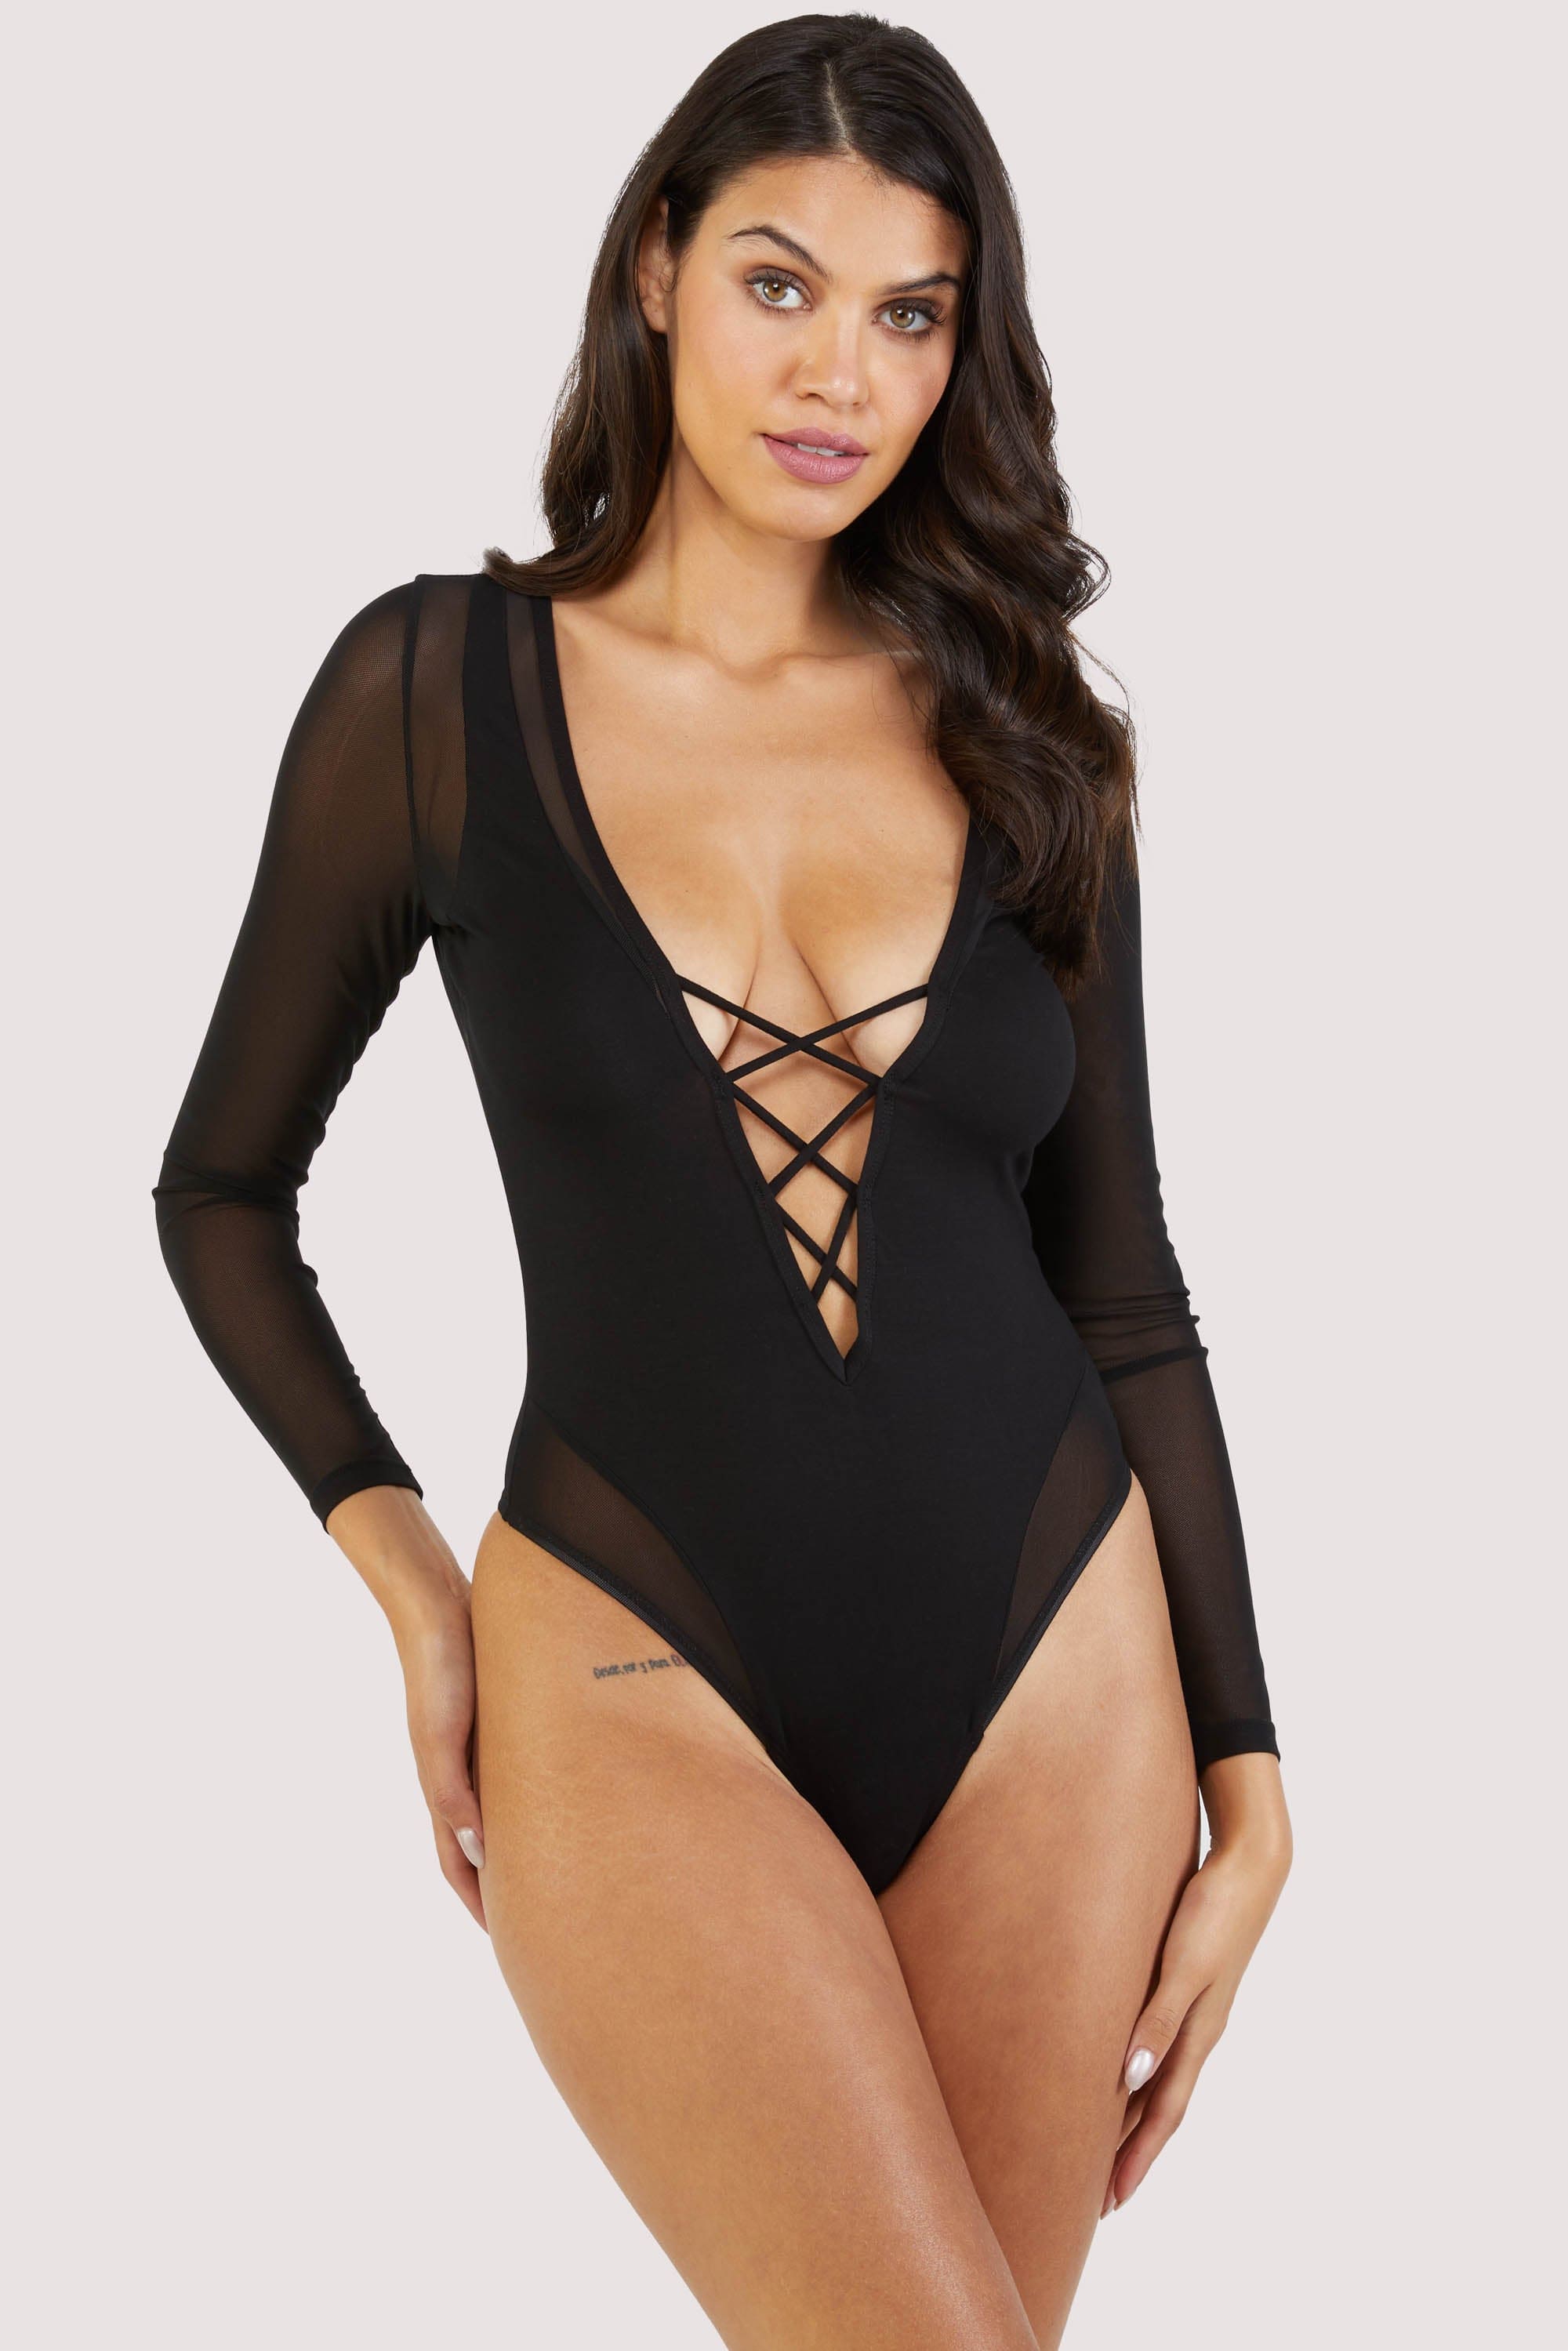 Black bodysuit with sheer arms